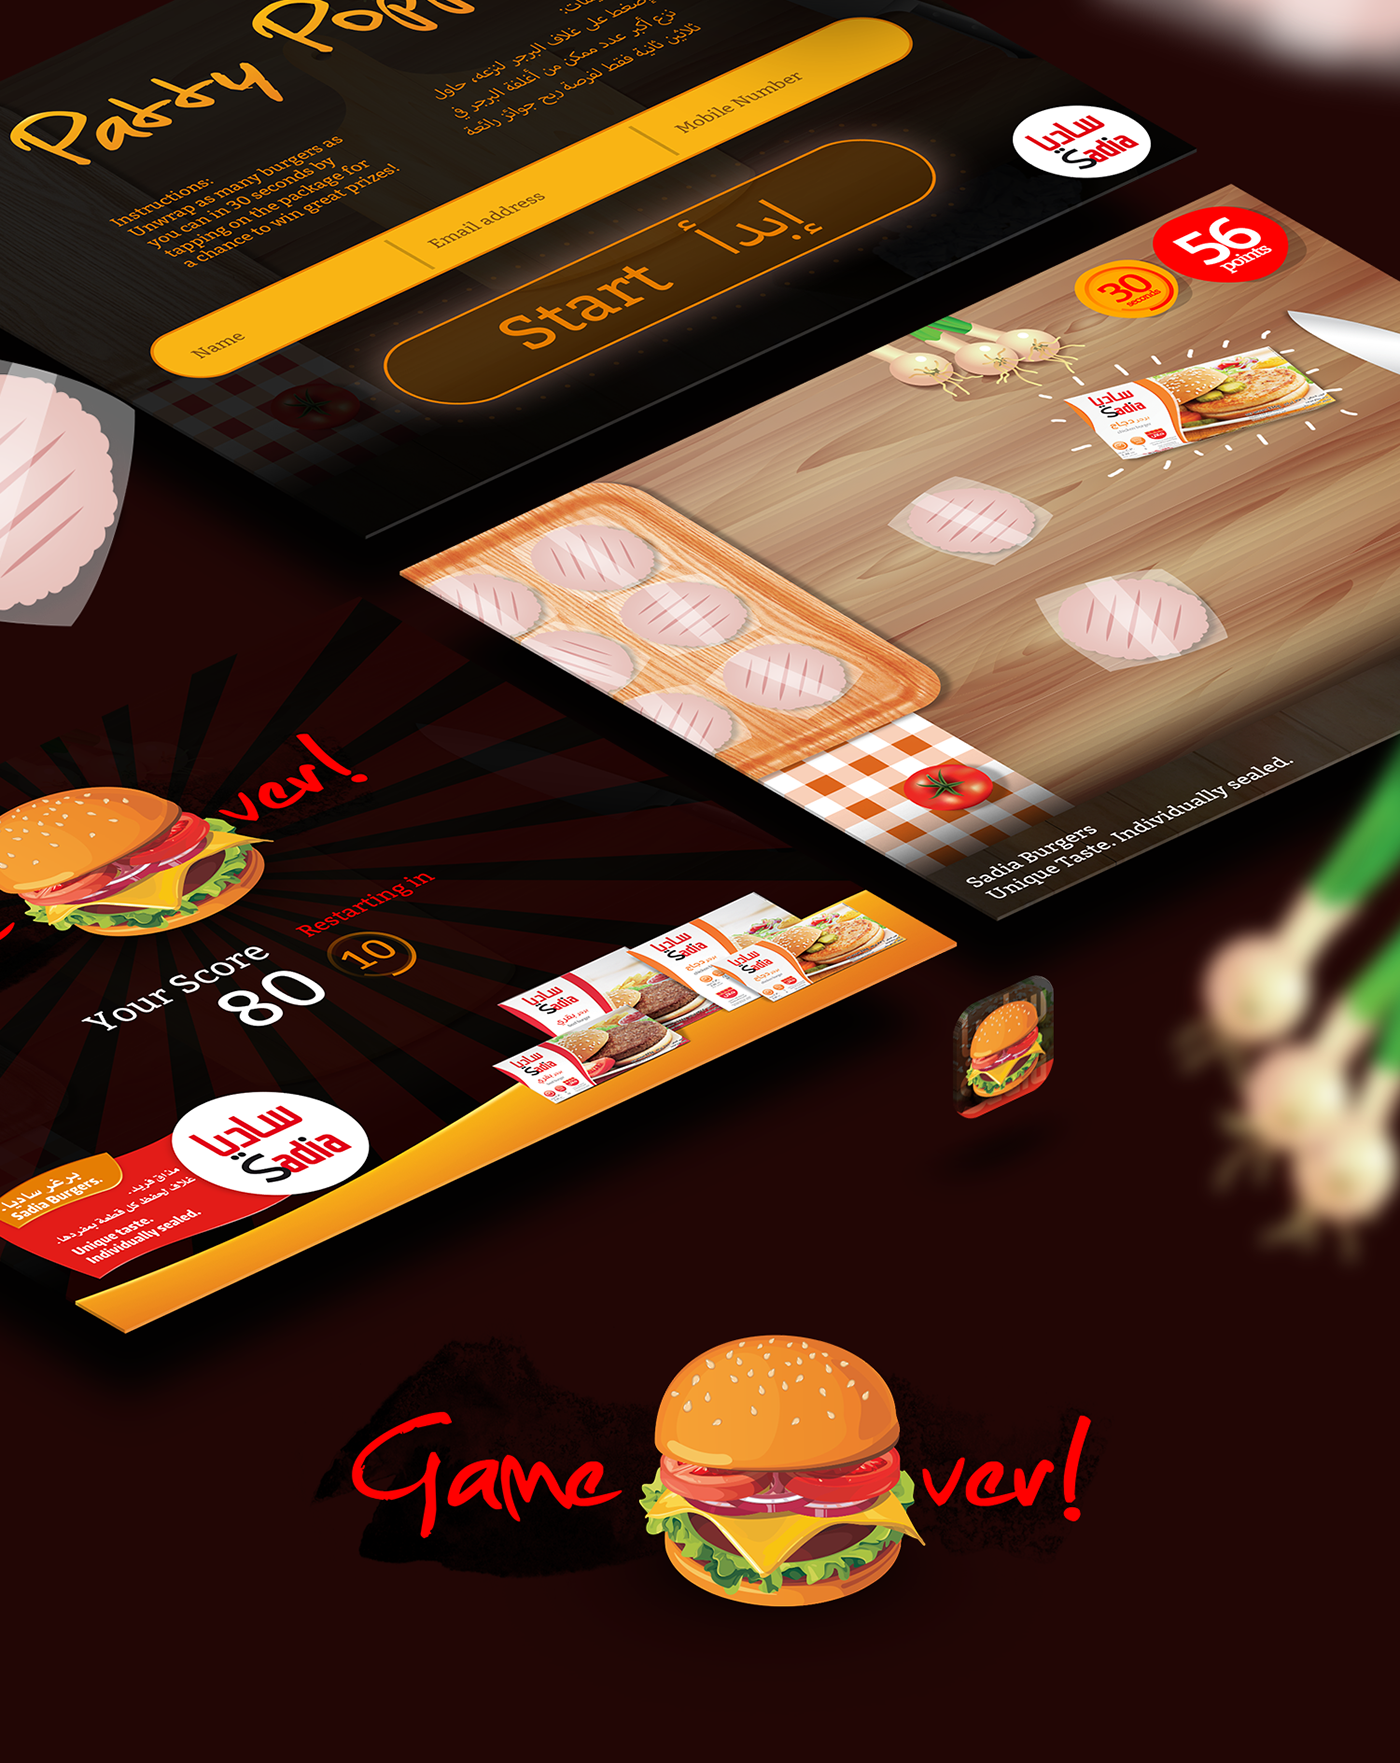 Patties chickewn beef Burgers game UI ux instore activation